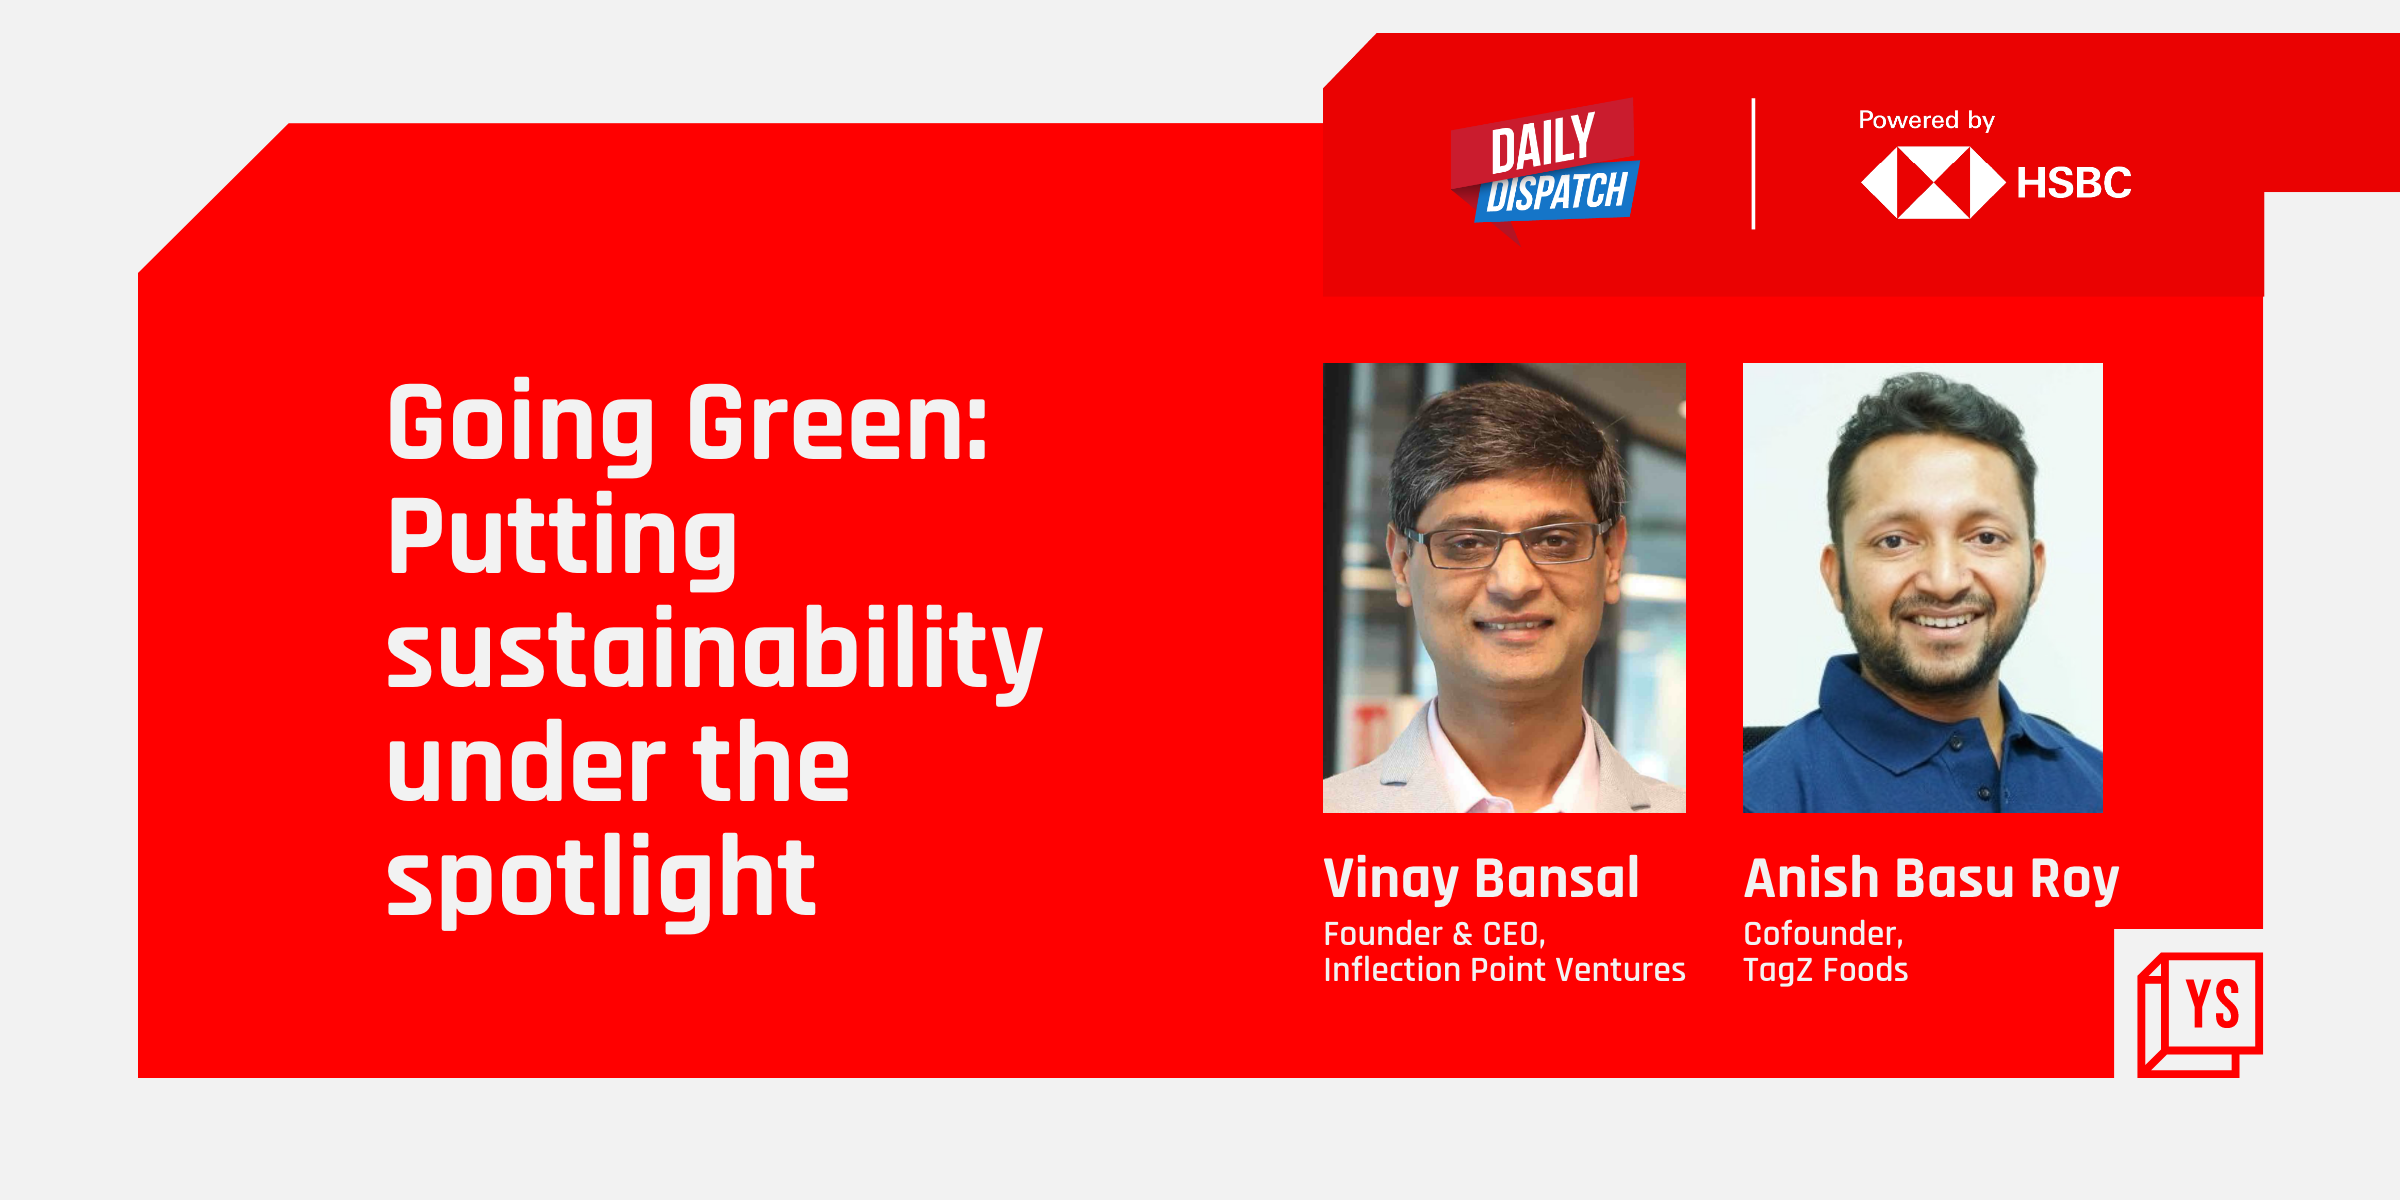 The Green Picture: Sustainability at the core of many emerging businesses in India